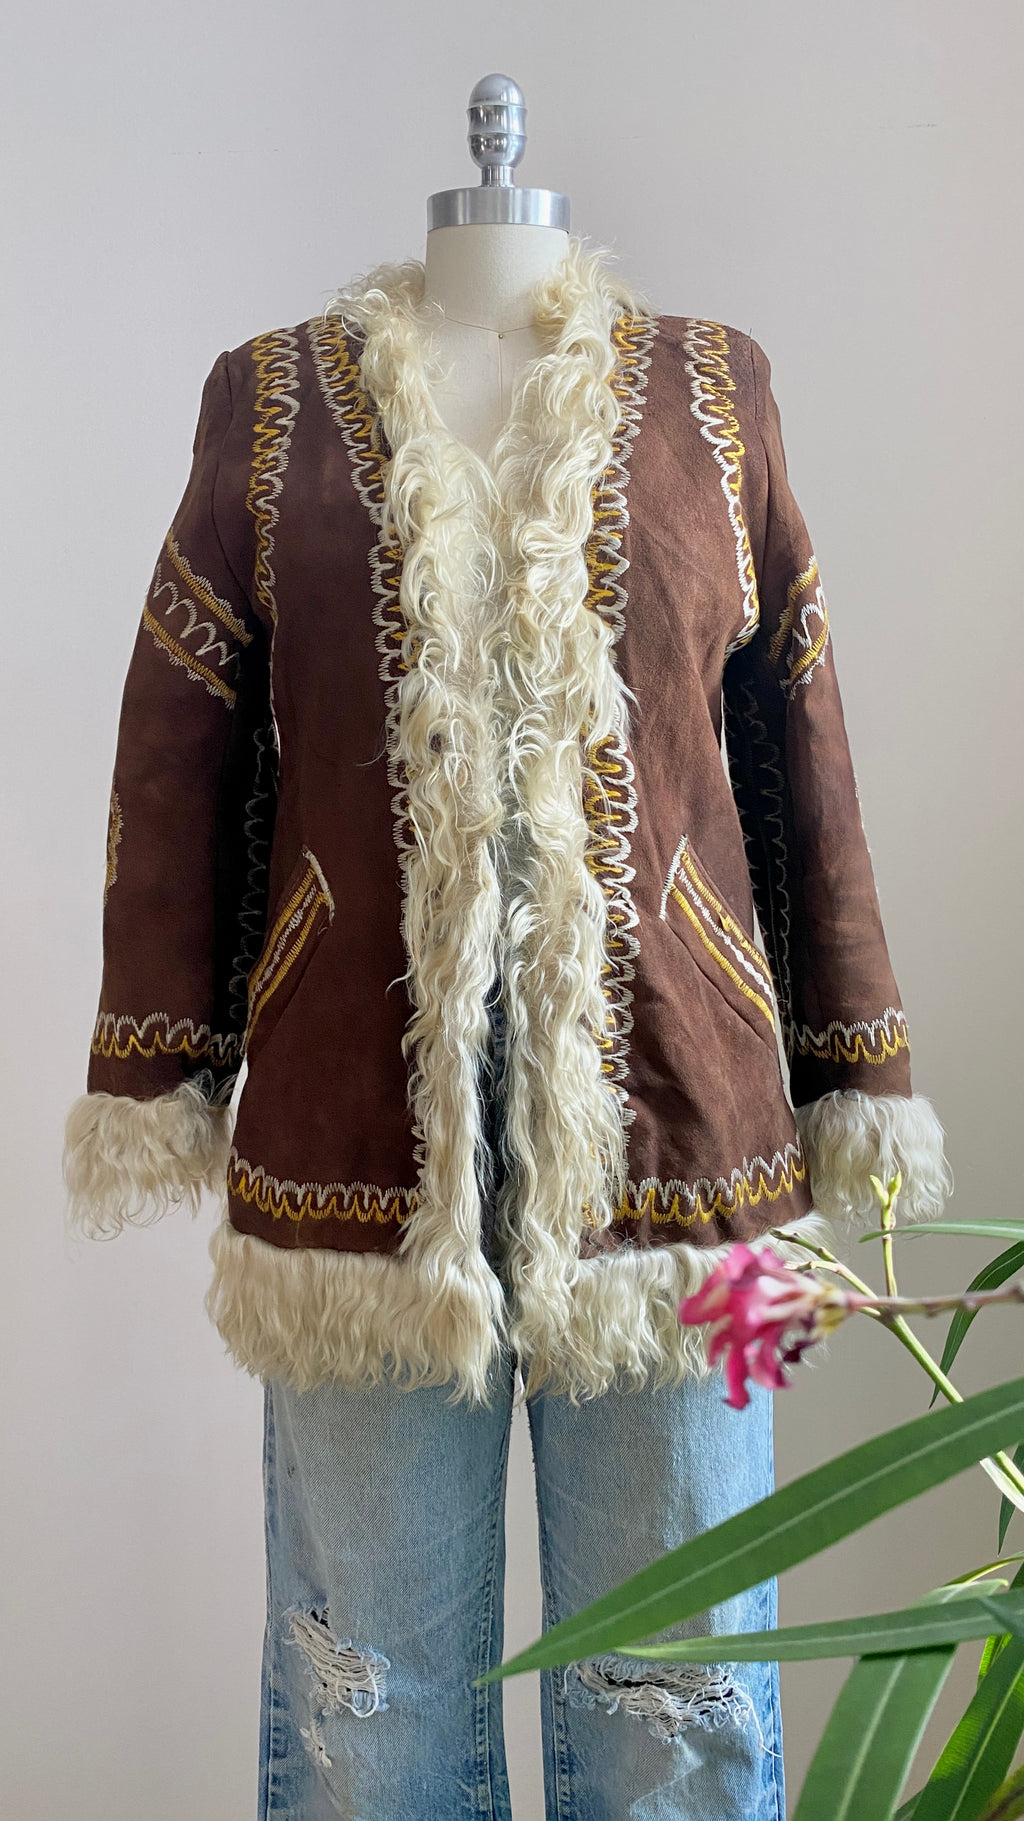 Vintage 1960s Afghan Shearling Suede Brown Penny Lane Coat Jacket with Silk Embroidery XS Janis Joplin Jimmy Hendrix Style